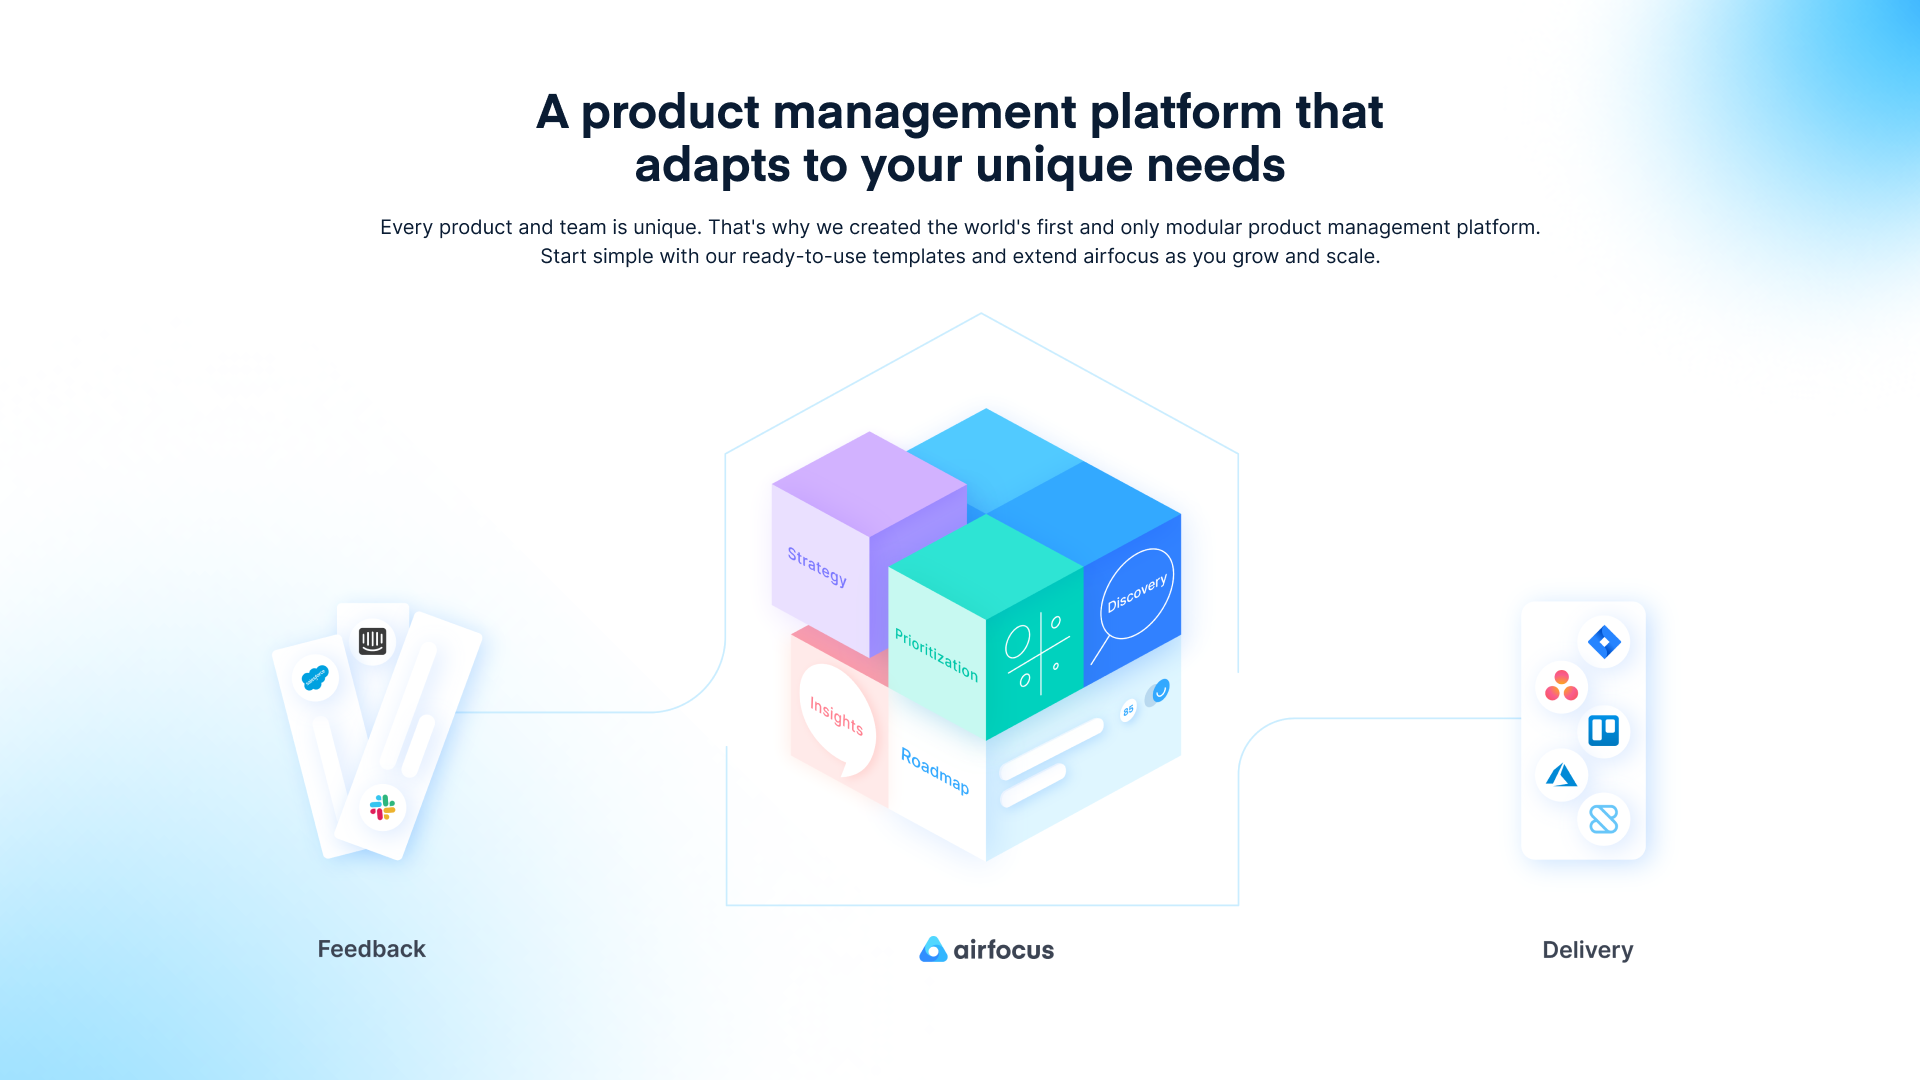 airfocus Software - Every product and team is unique. That's why we created the world's first and only modular product management platform. Start simple with our ready-to-use templates and extend airfocus as you grow and scale.